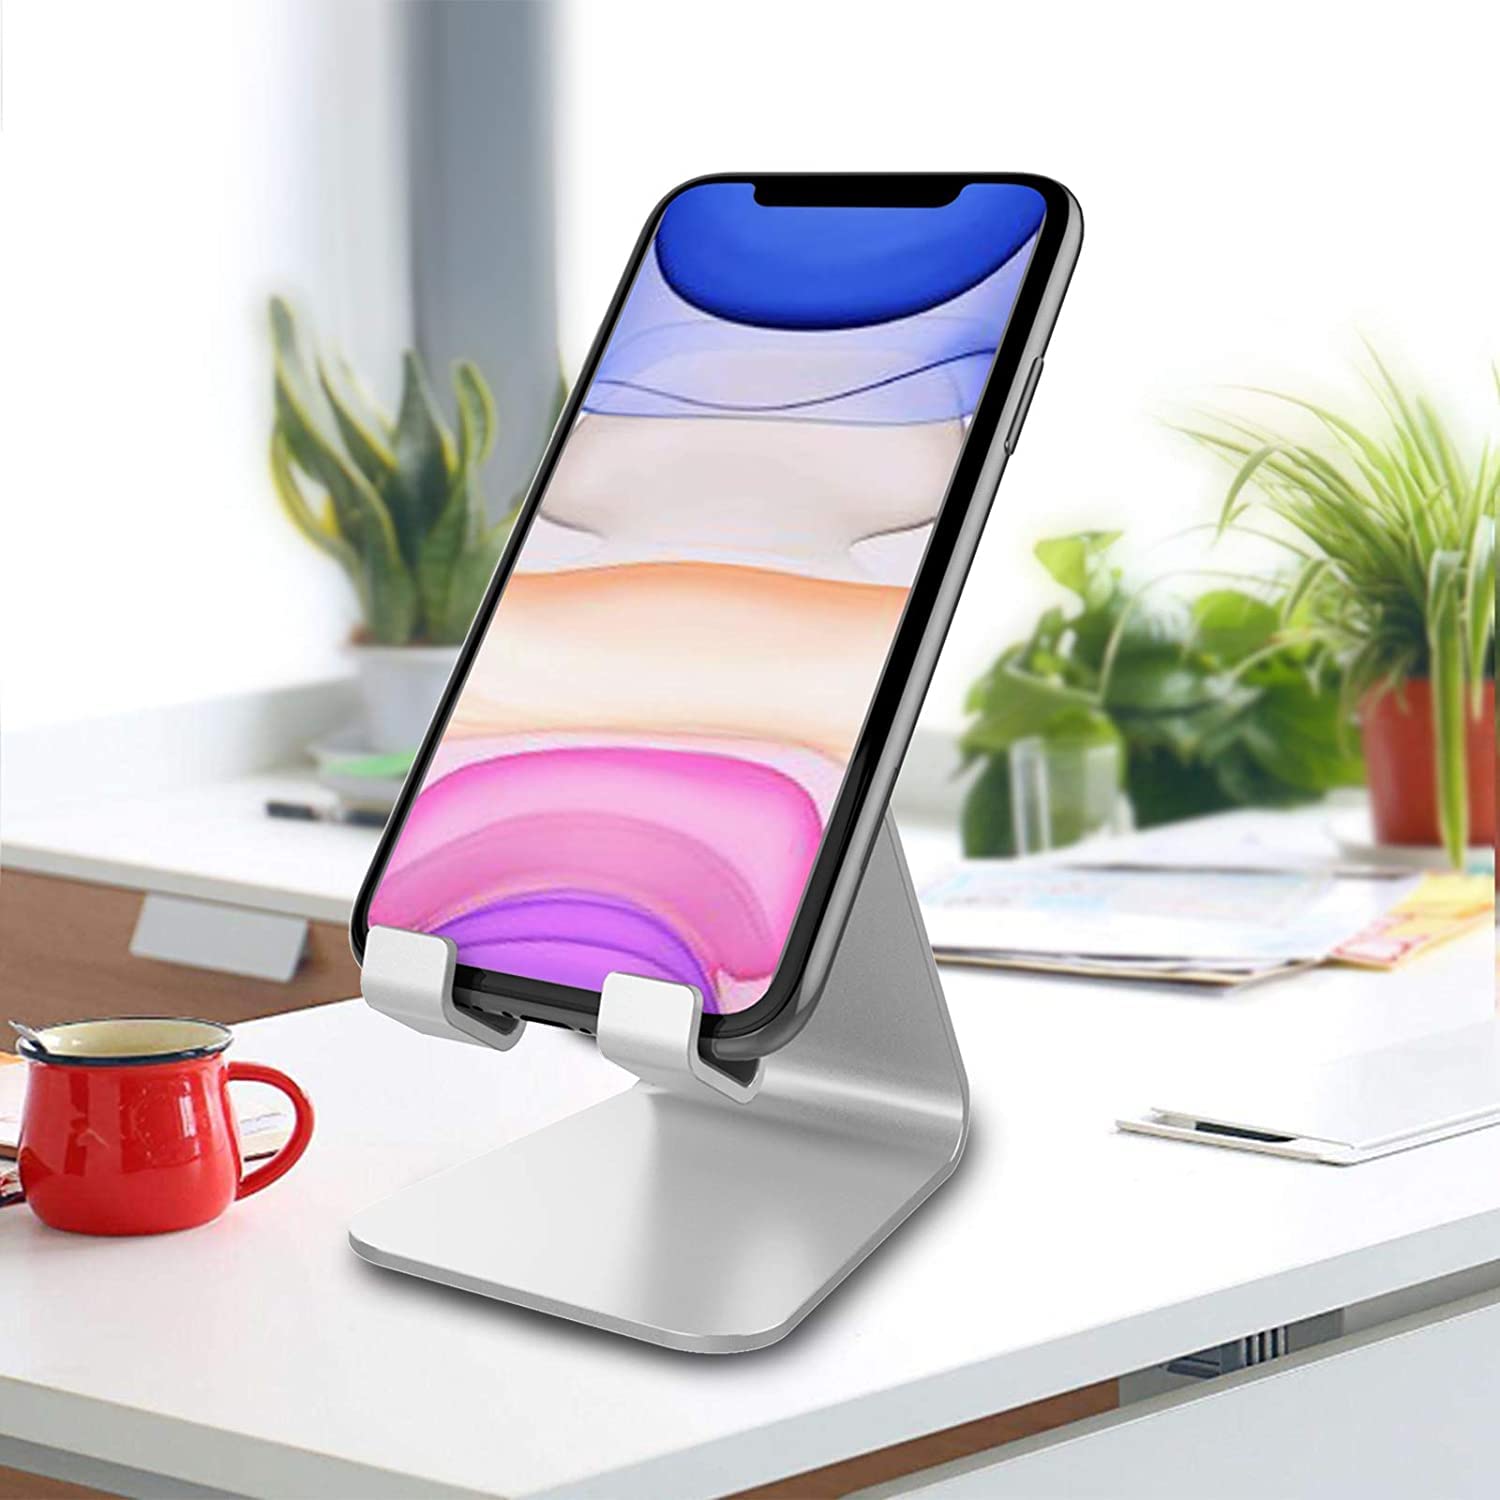 THRIVE Cell Phone Stand, Cradle, Holder,Aluminum Desktop Stand